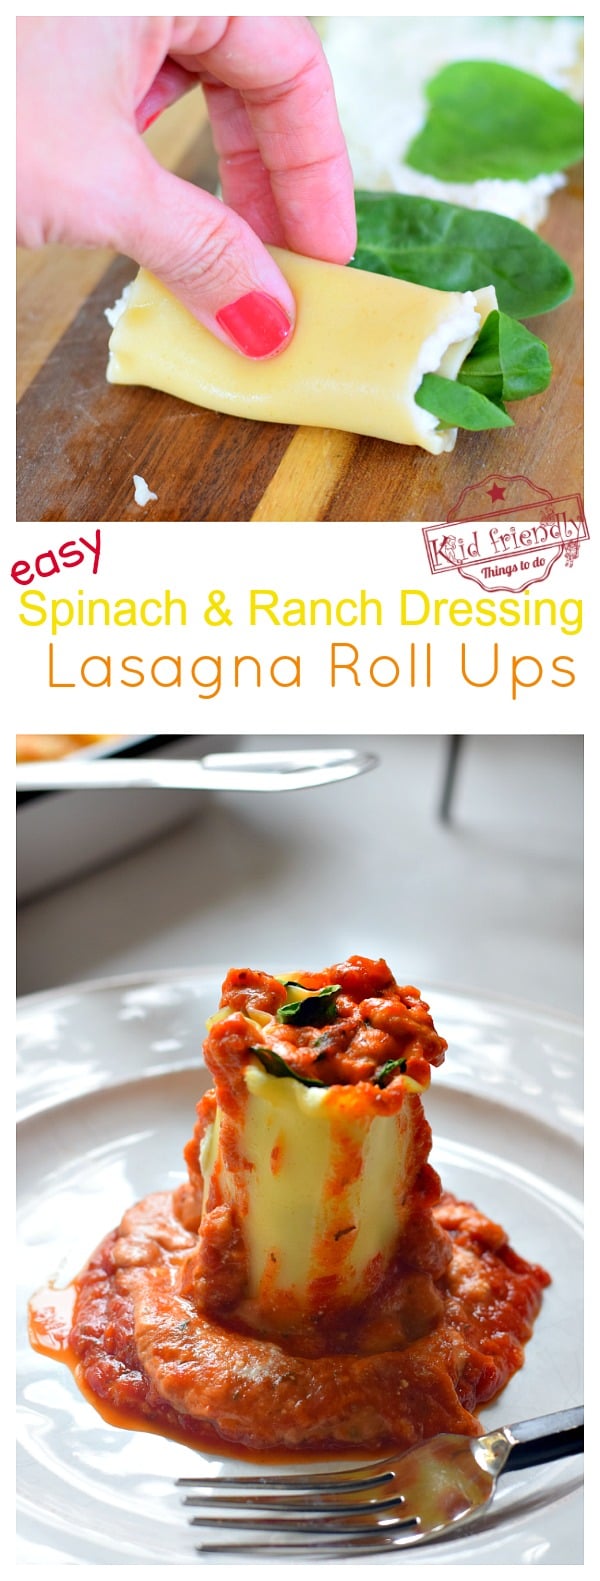 Lasagna Roll Ups with spinach and ricotta